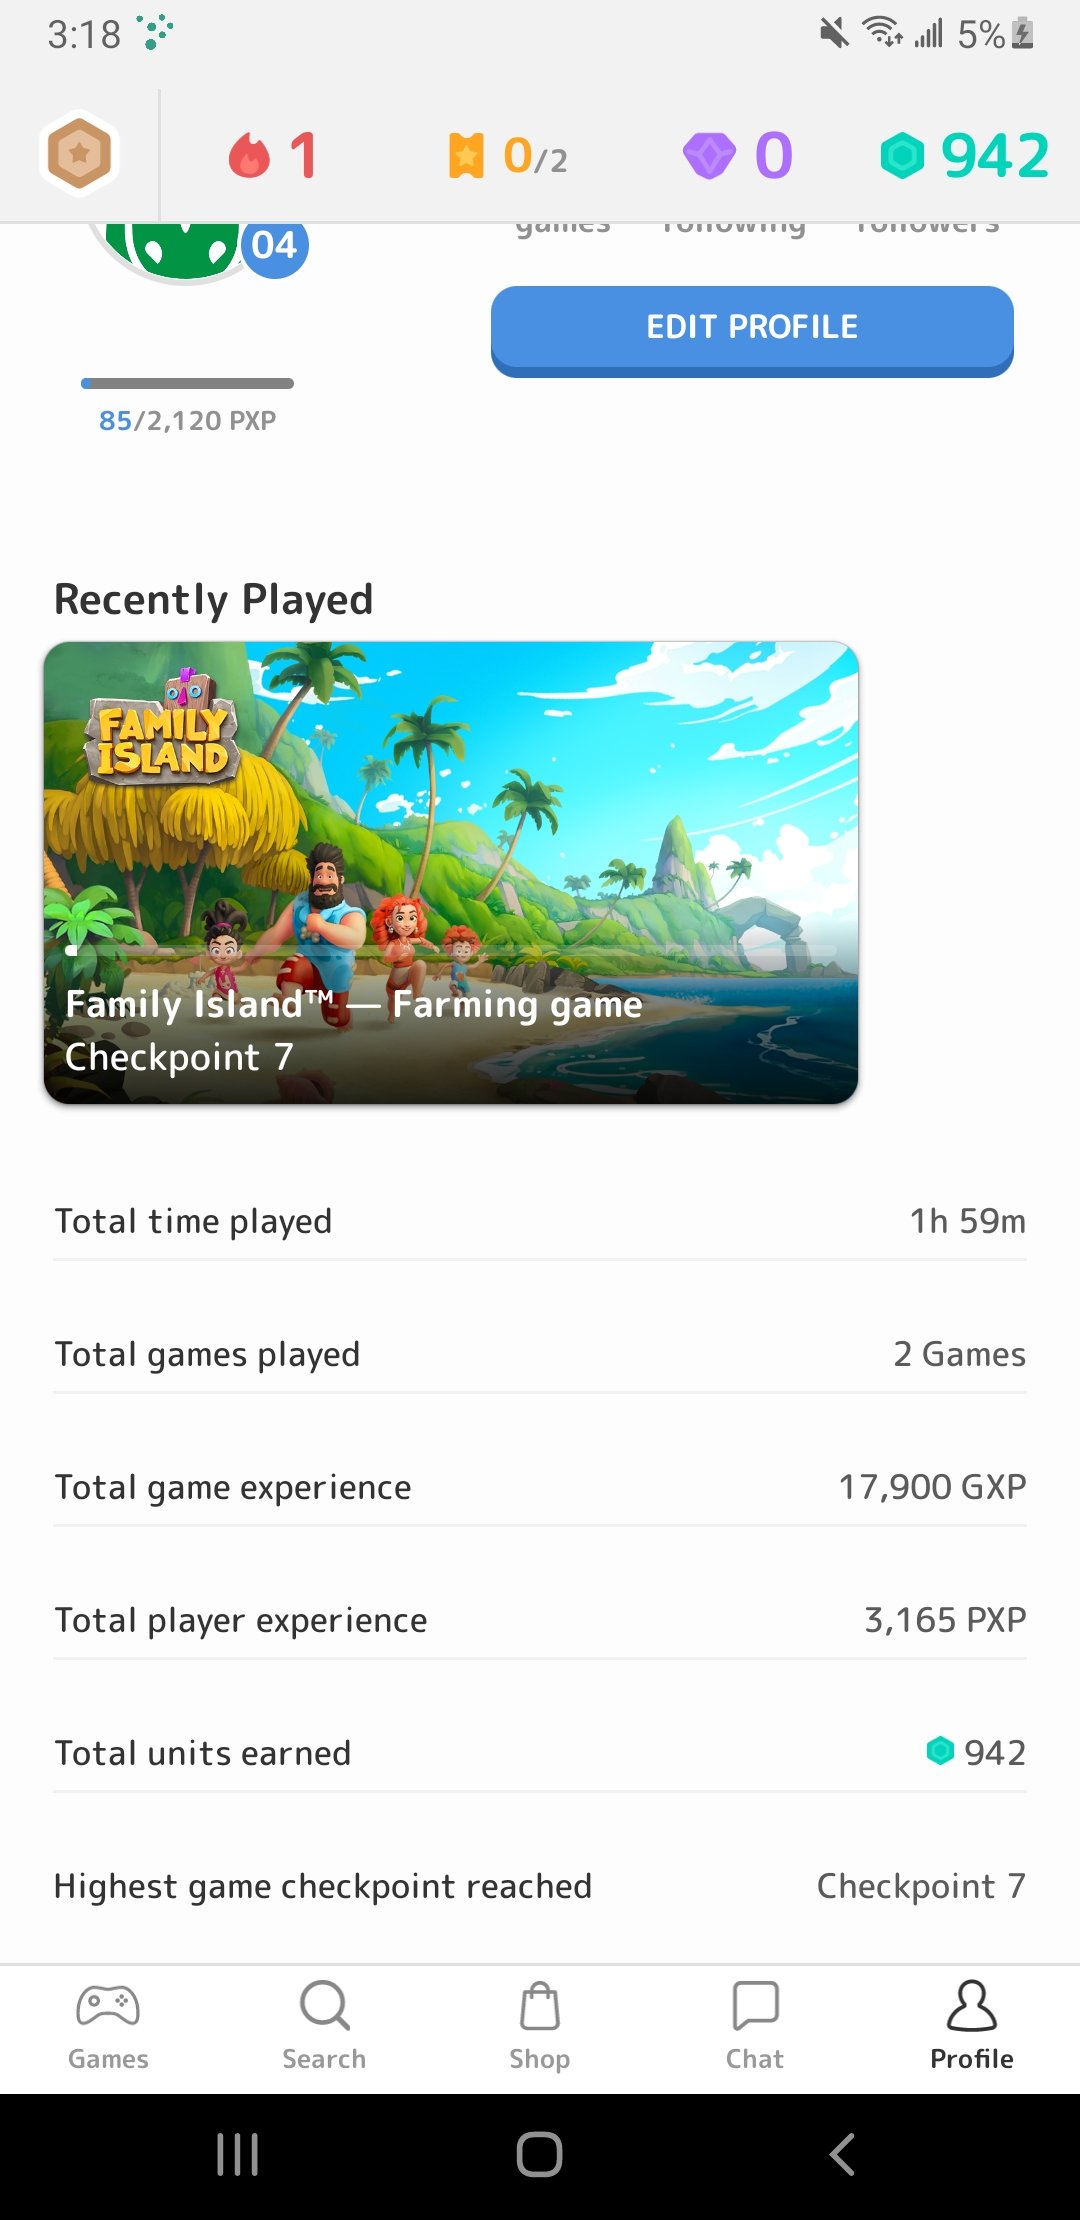 Minecraft Apps on Google Play Fleece Players Out of Big Money